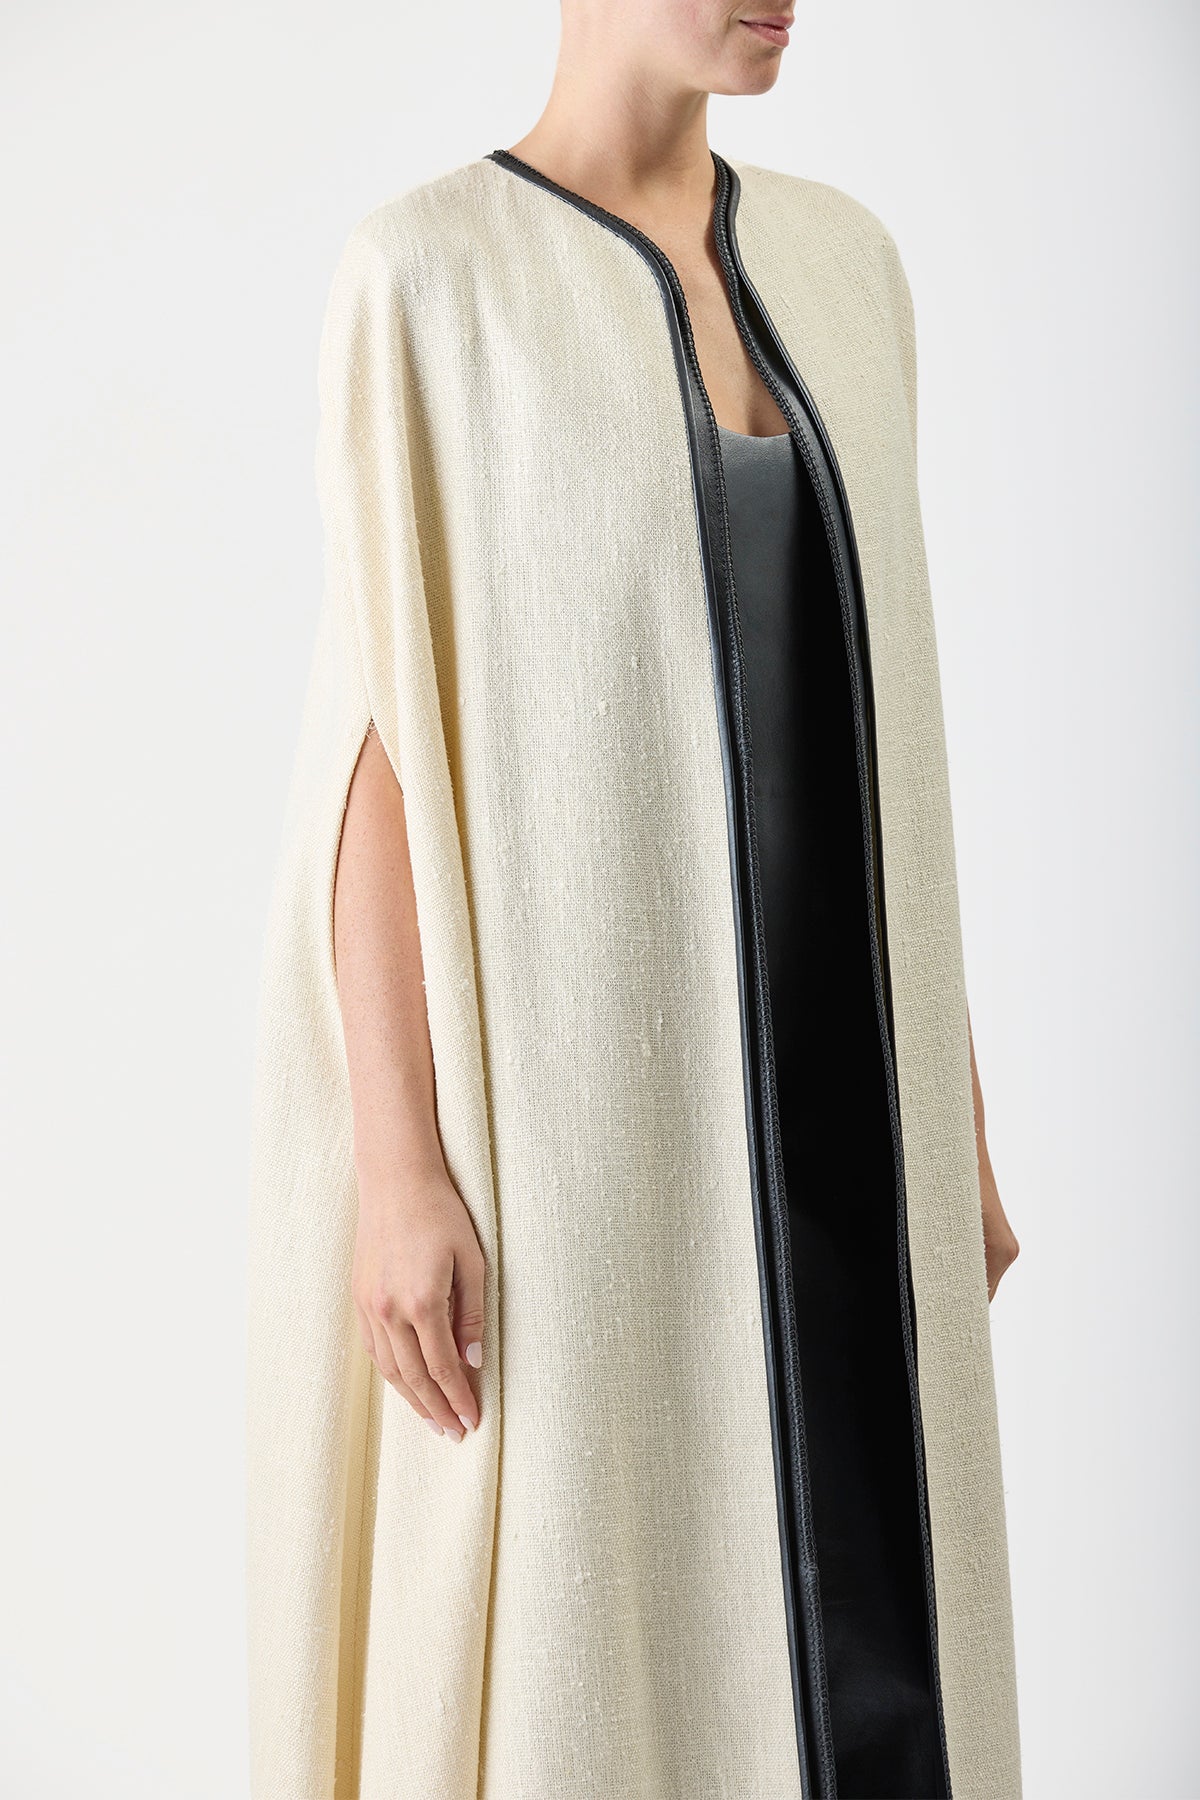 Glenys Cape in Soft Silk Wool with Leather Gilet